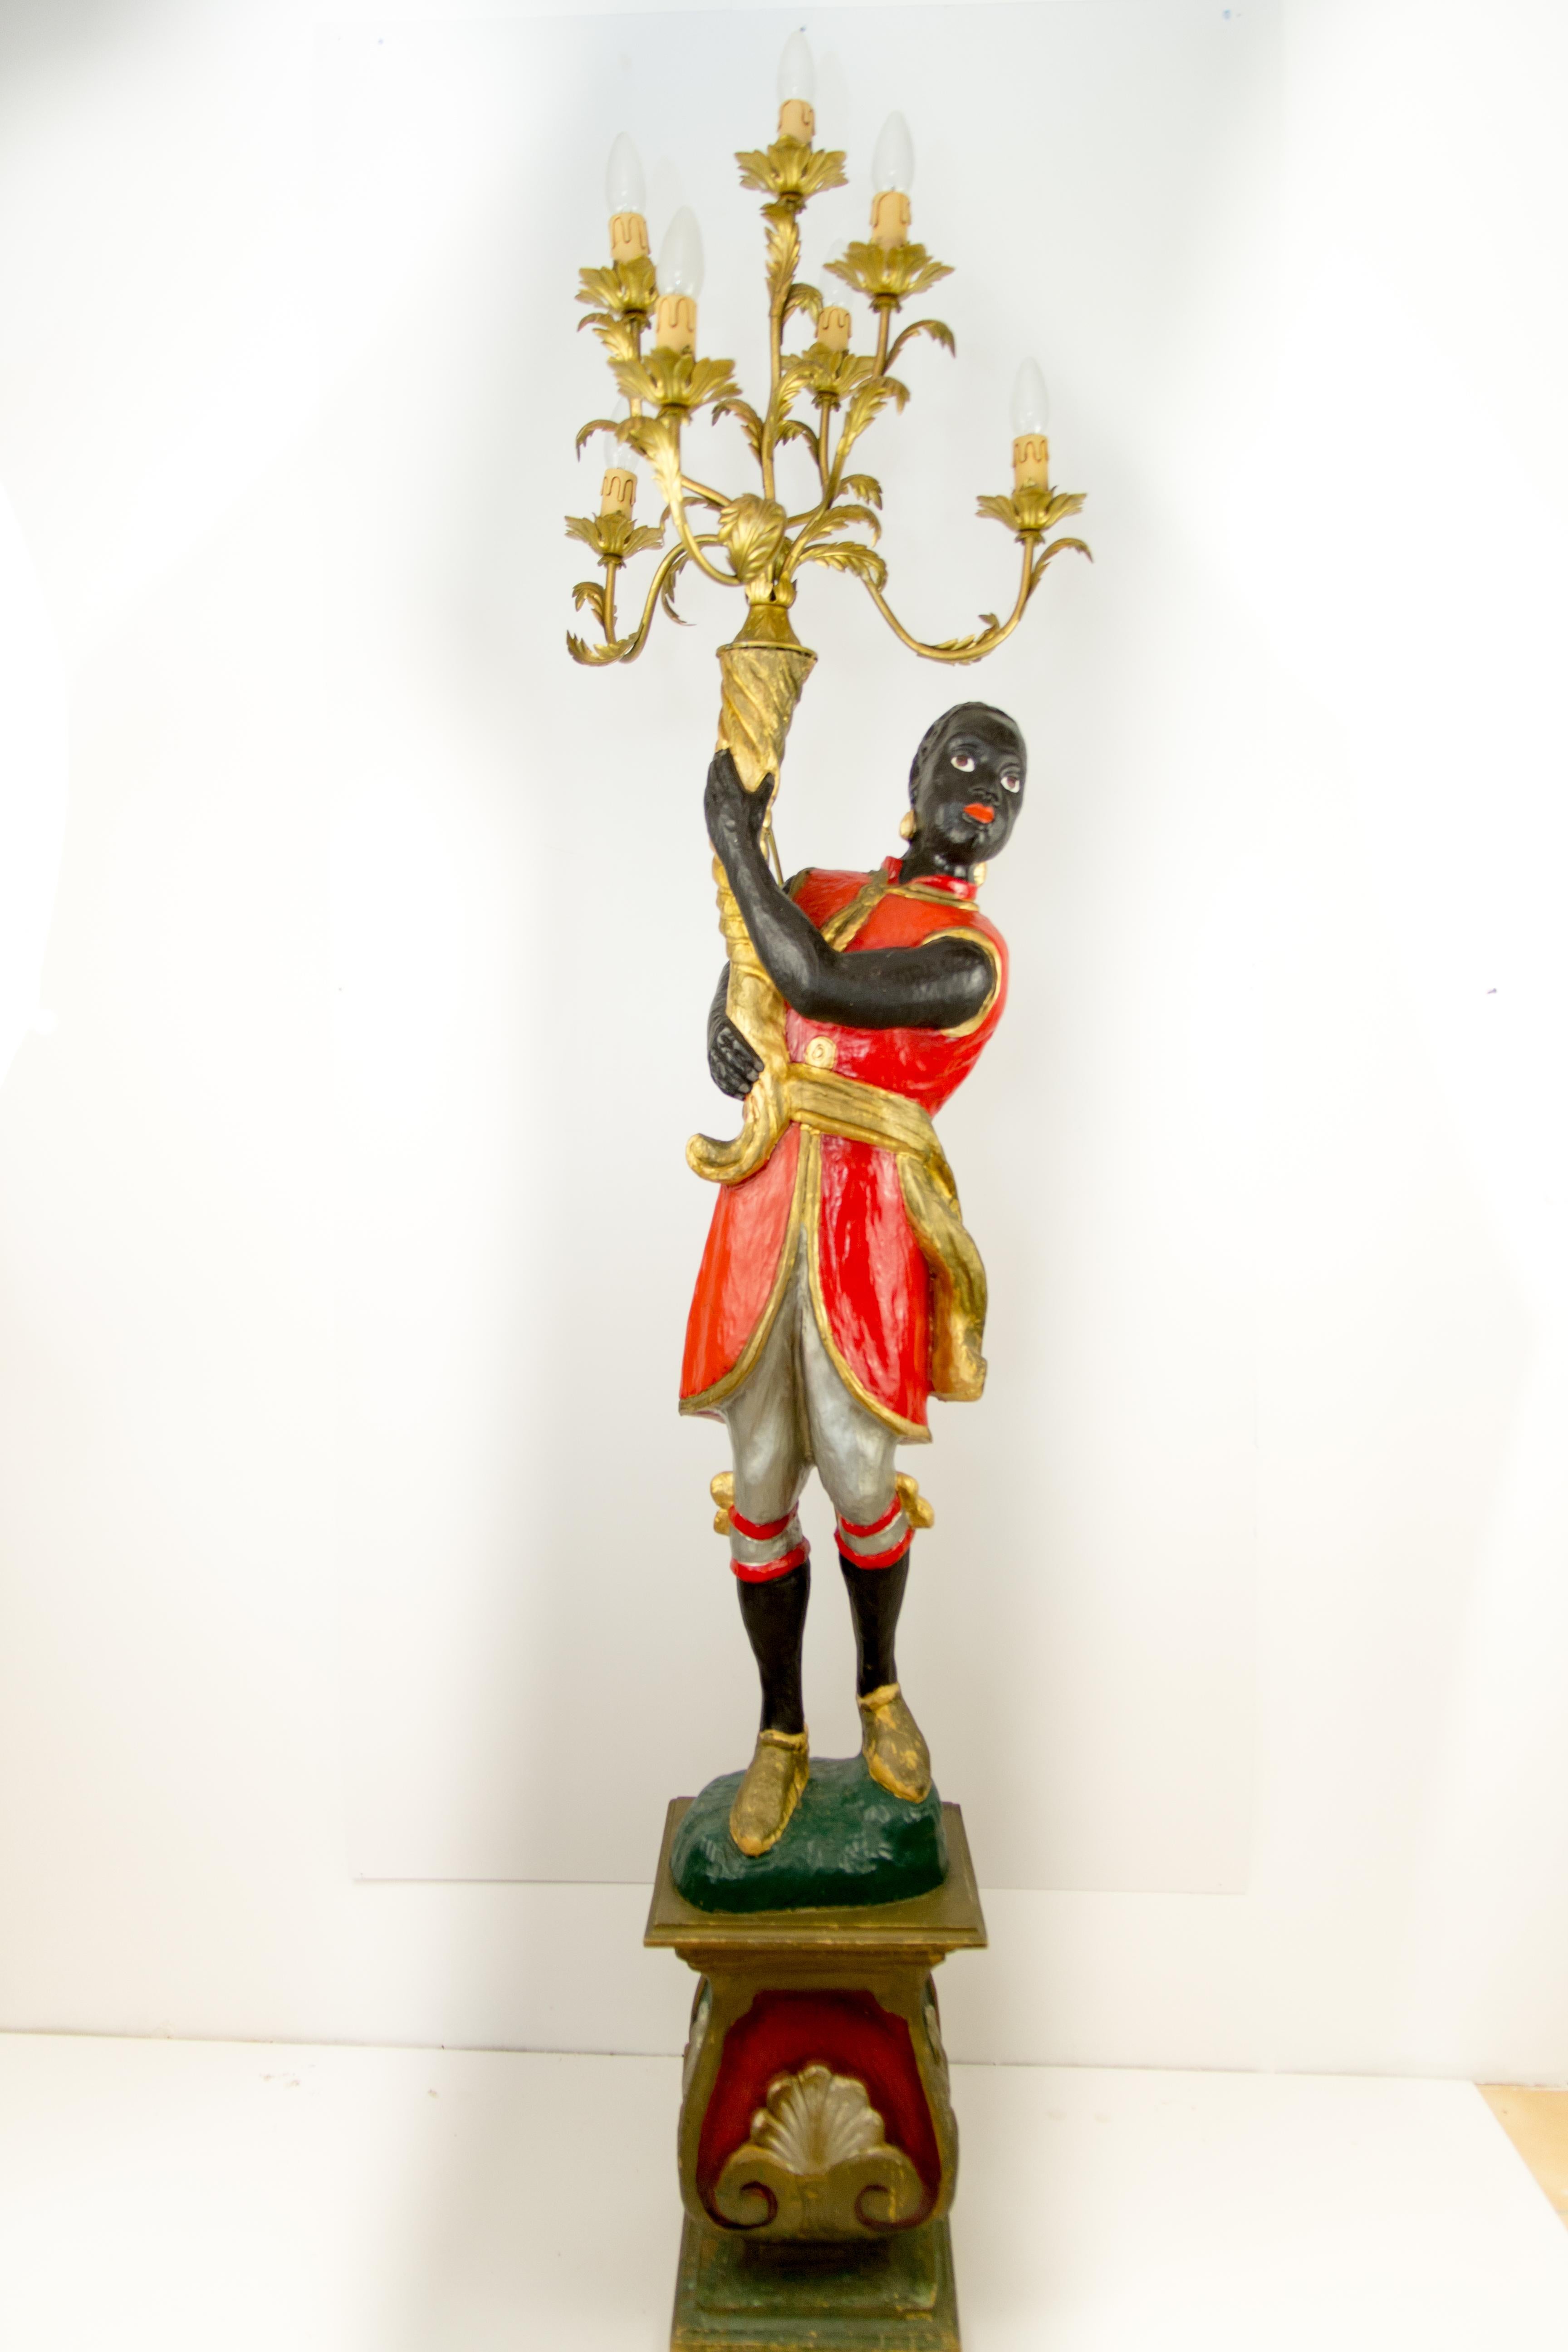 A beautiful and colorful Italian floor lamp is made of carved wood and the polychrome painted figure is holding a seven-arm candelabra. Each arm of golden color tole candelabra is decorated with foliage decors and flower-shaped bobeches. The figure